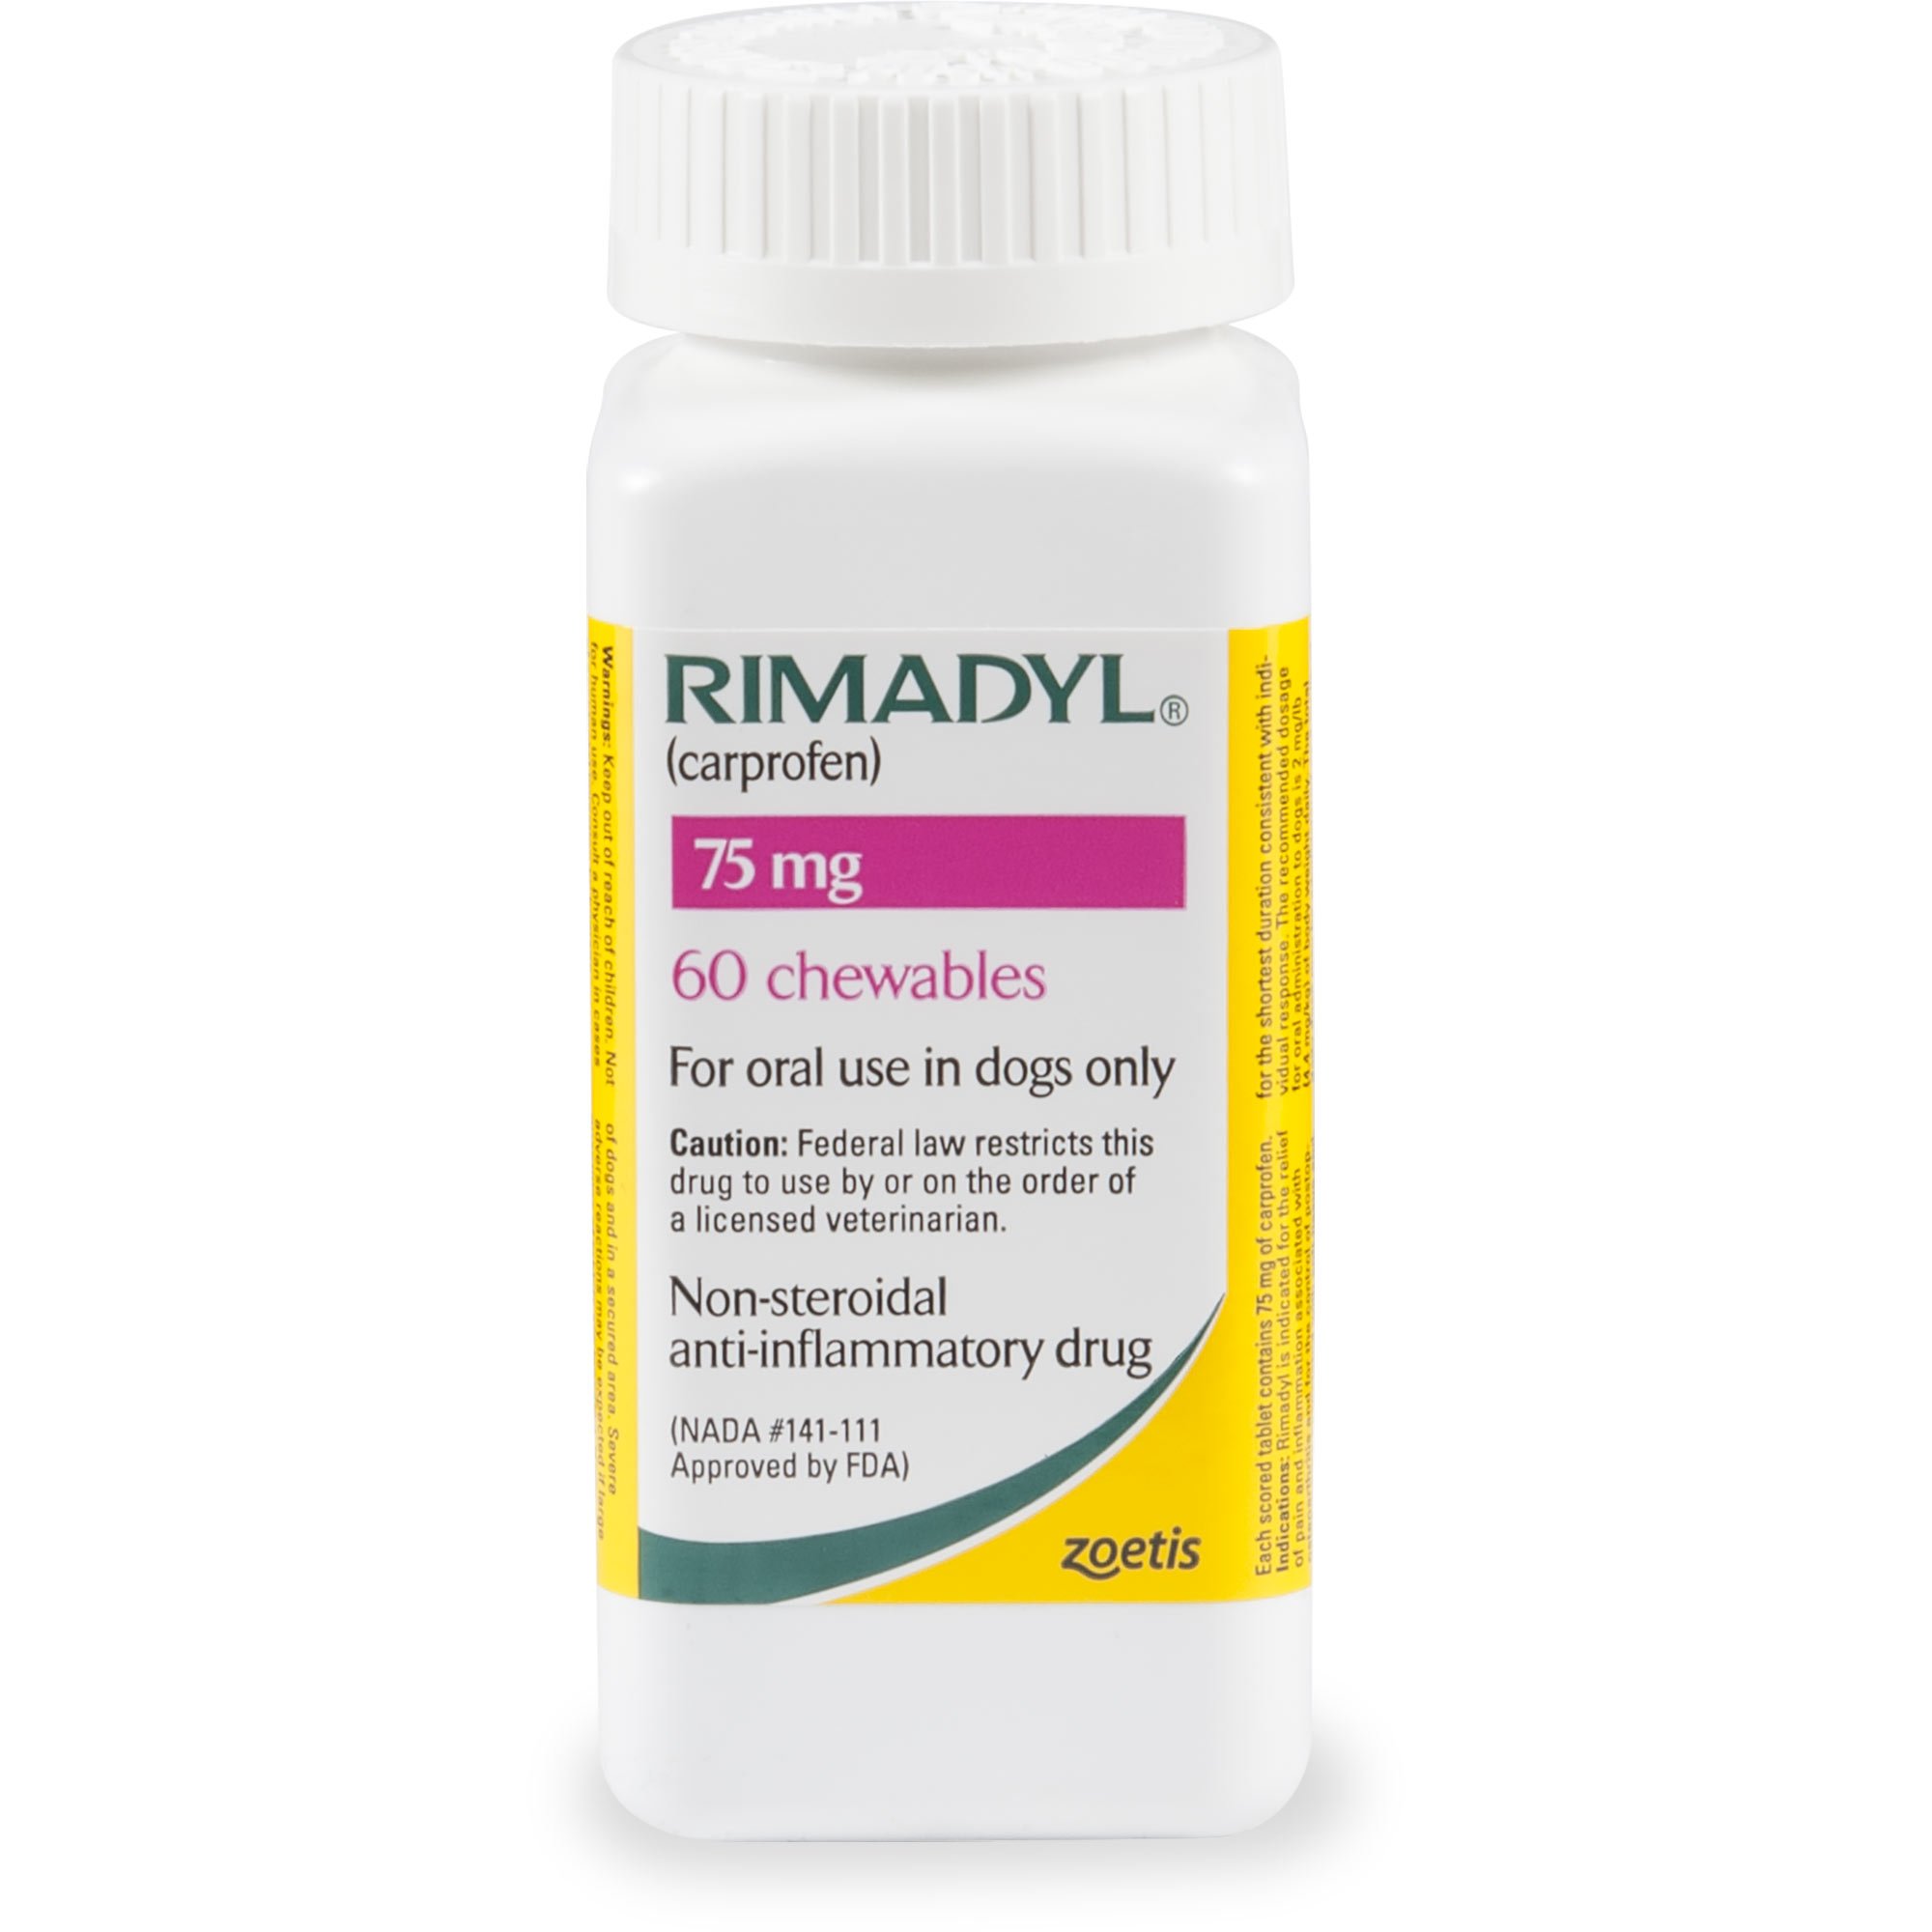 Which Is Better Tramadol Or Rimadyl